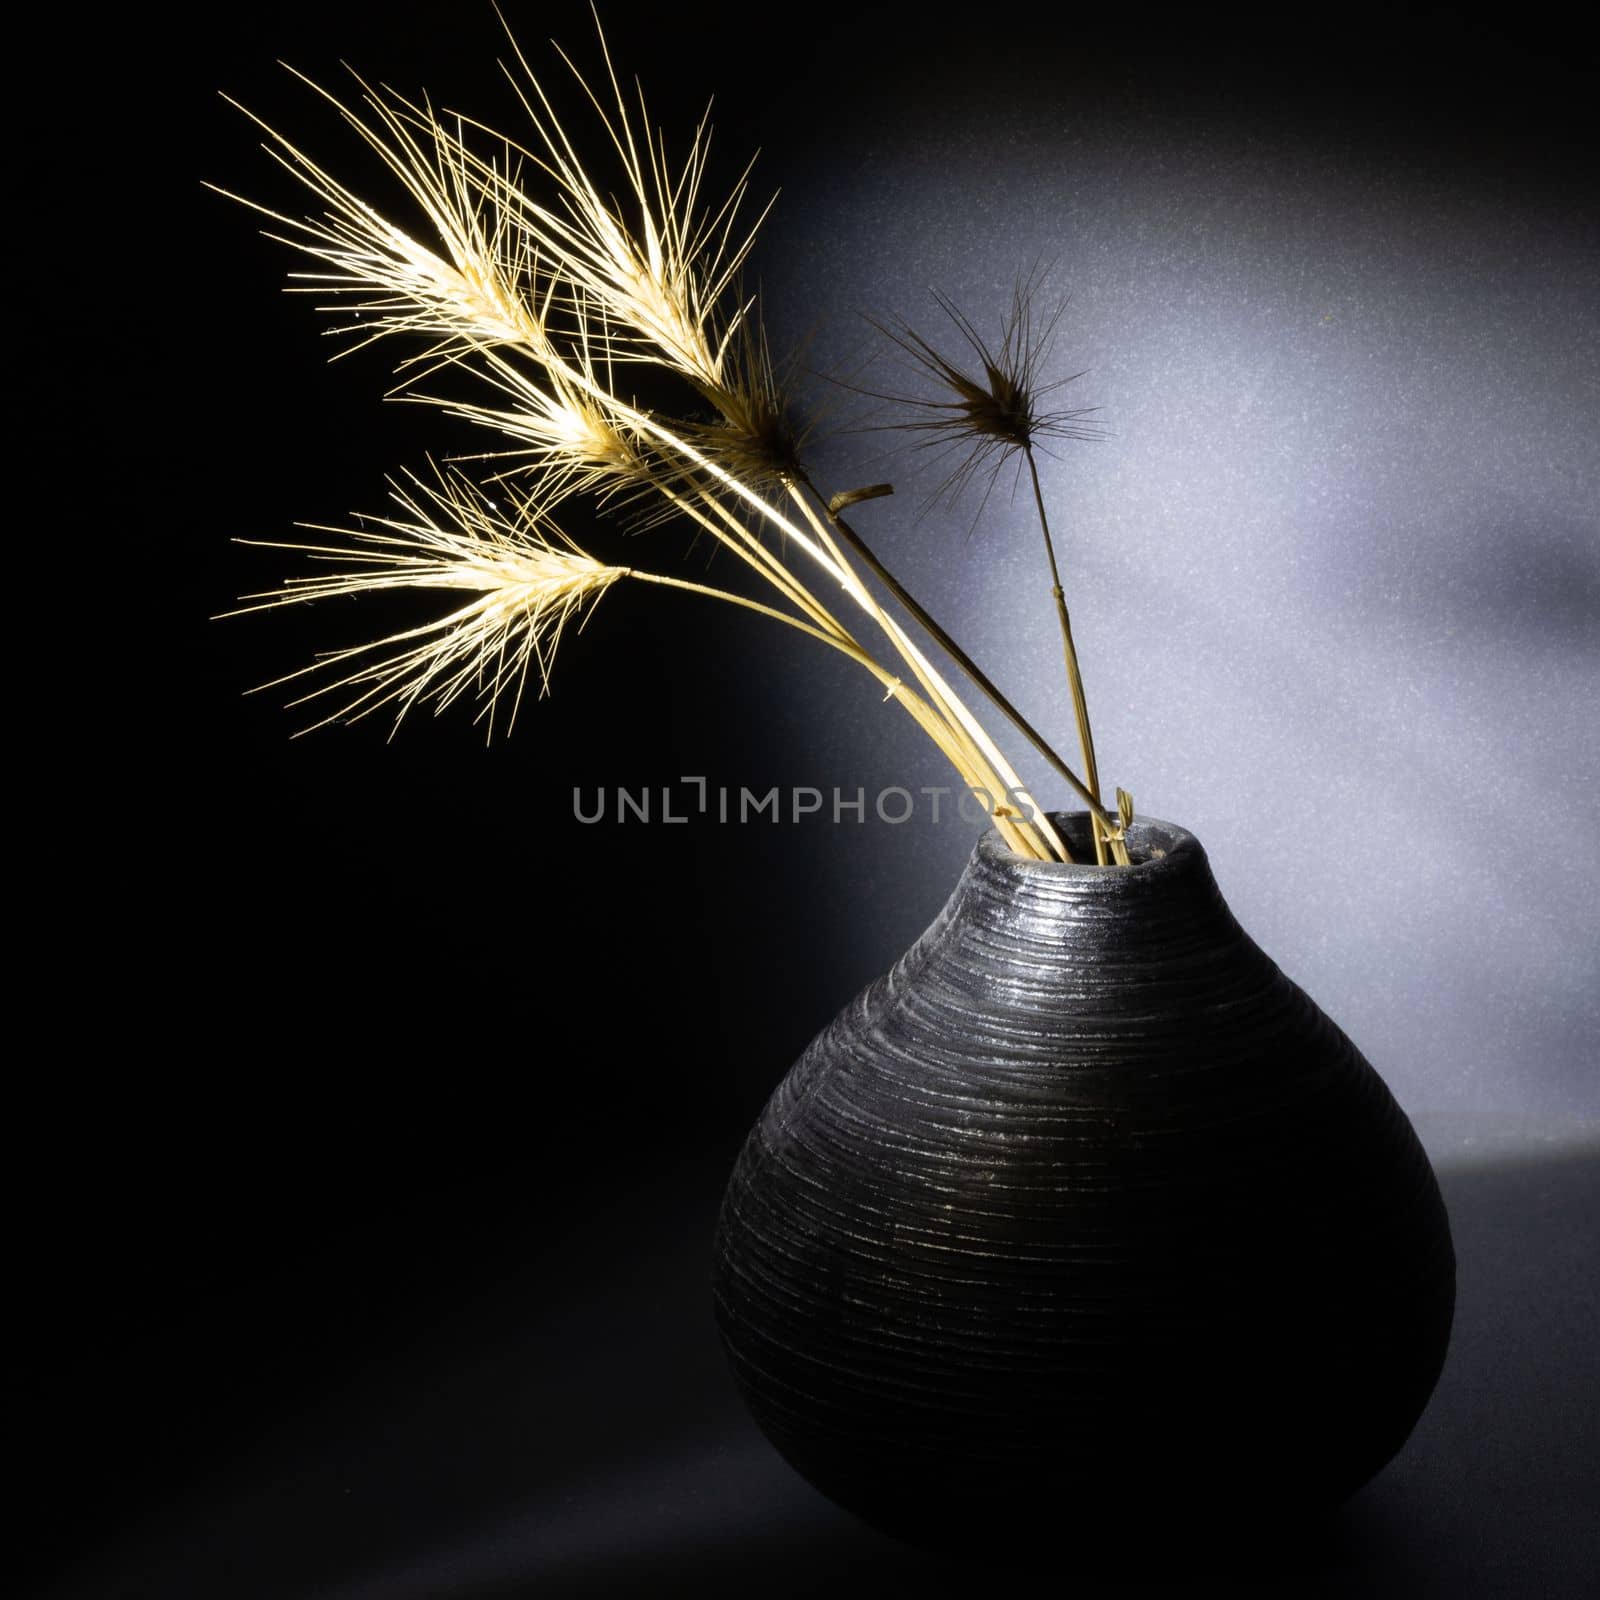 Dried spikelets in a small decorative vase by clusterx